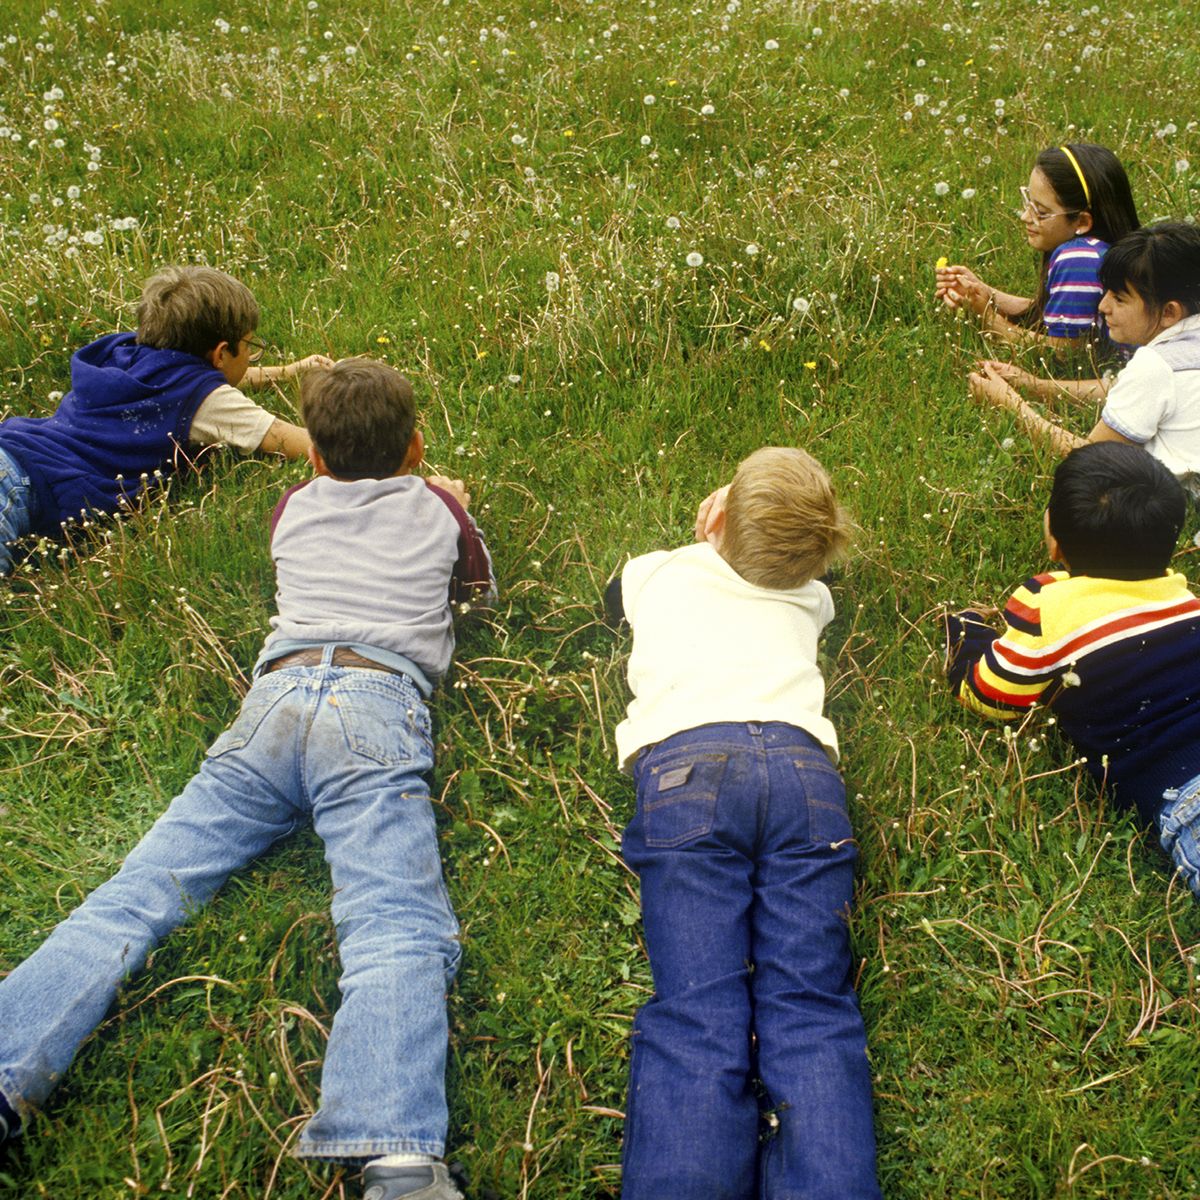 Children laying on grass picking dandelions,Santa Fe National Forest, NM